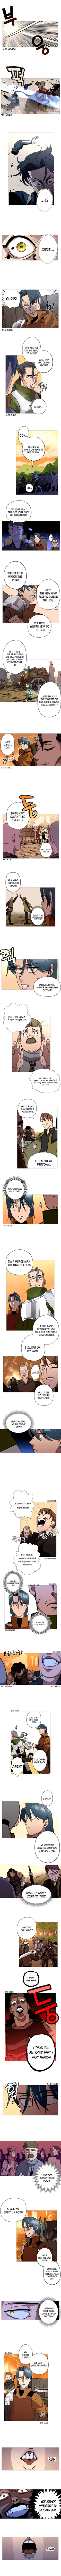 The Story of a Low-Rank Soldier Becoming a Monarch. Chapter 1 page 2